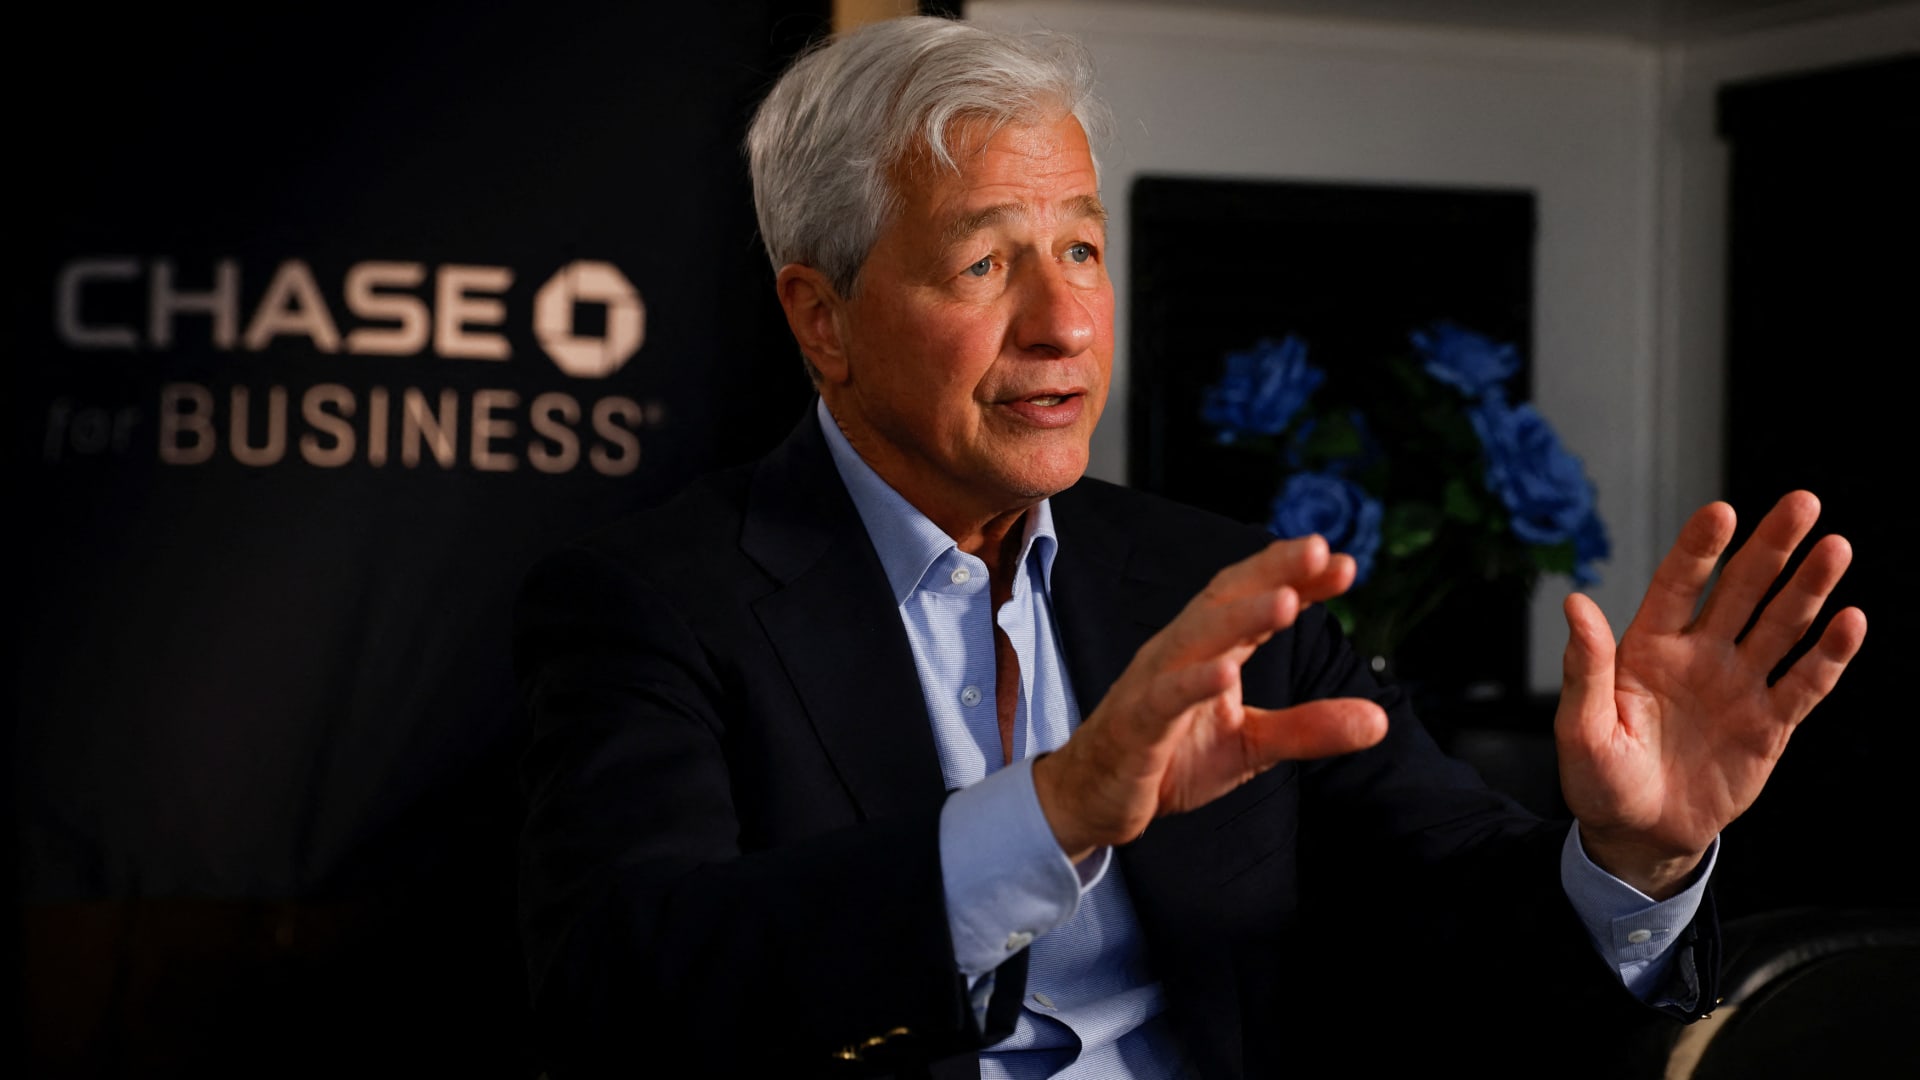 JPMorgan Chase CEO Jamie Dimon warns this is ‘the most perilous time’ for the entire world in decades